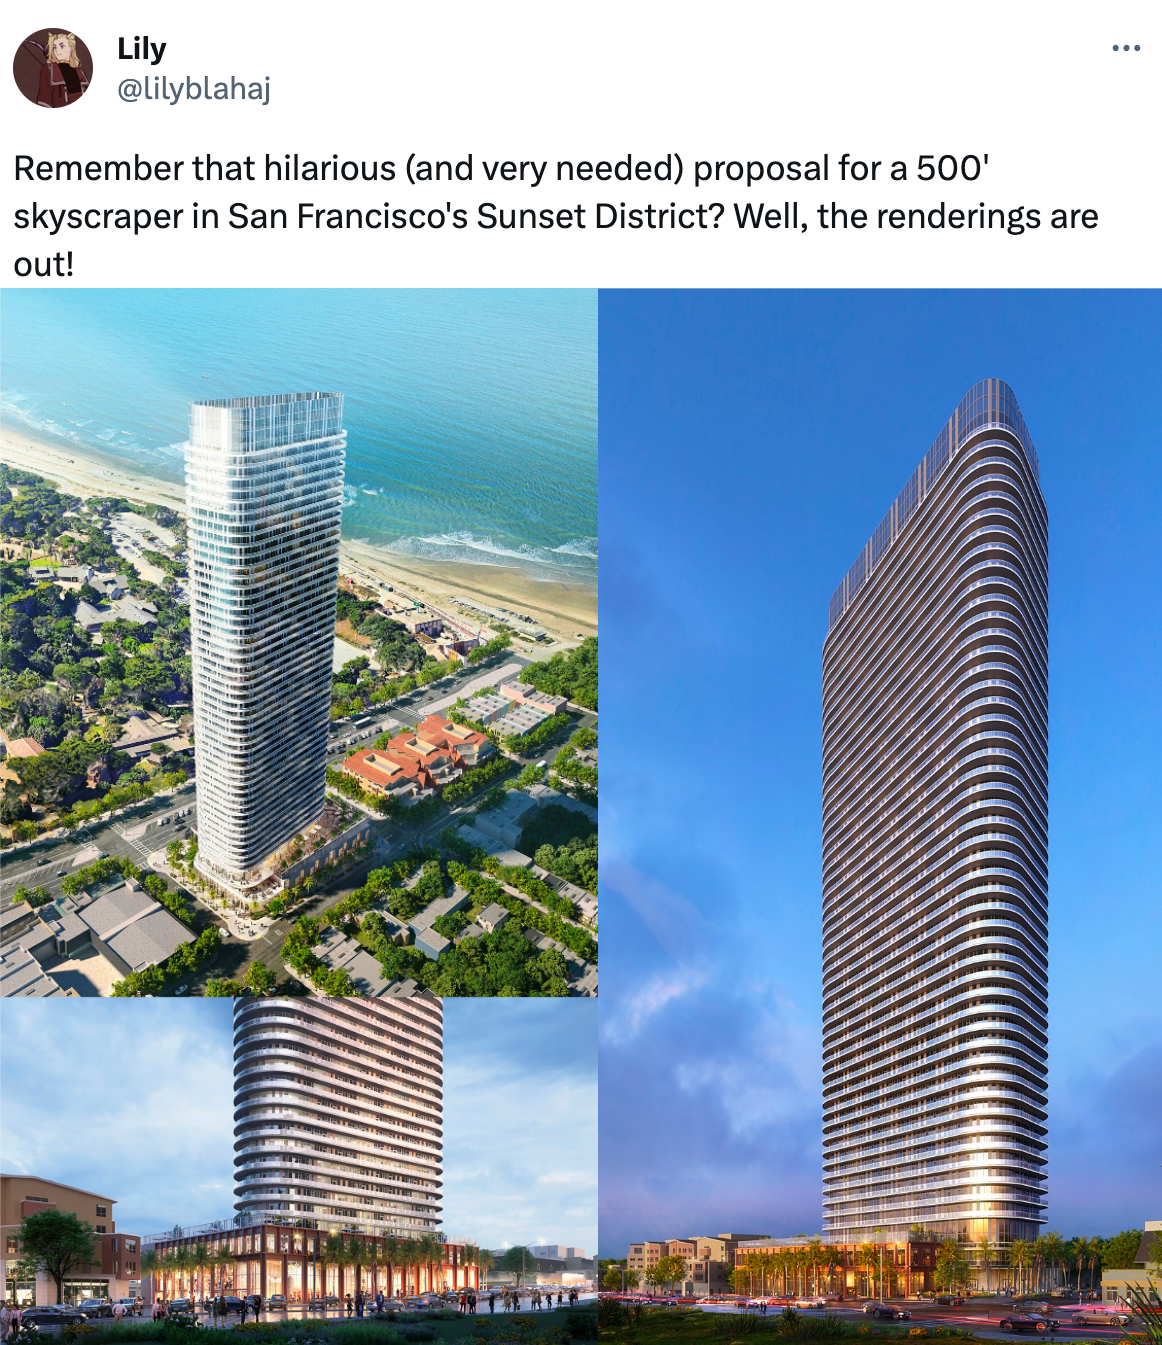  Lily @lilyblahaj Remember that hilarious (and very needed) proposal for a 500' skyscraper in San Francisco's Sunset District? Well, the renderings are out!